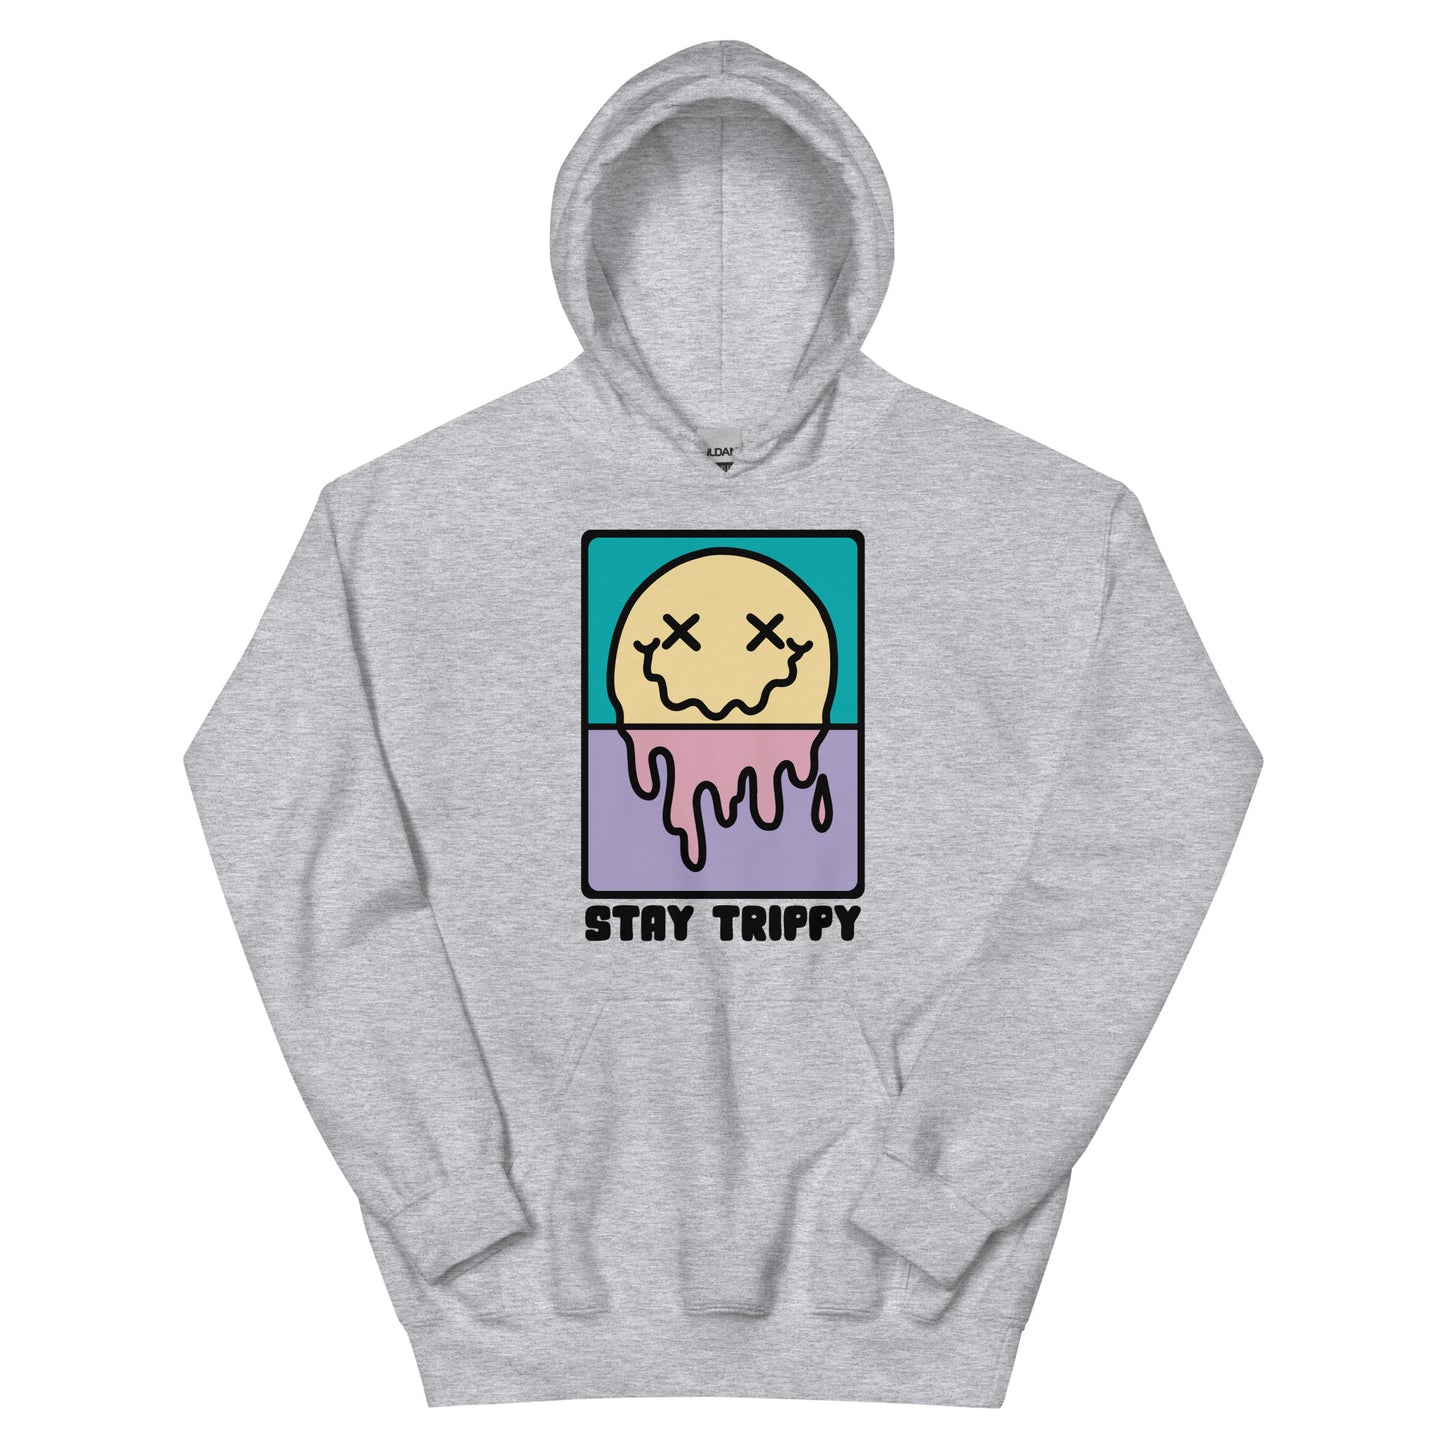 Stay Trippy Graphic Unisex Hoodie